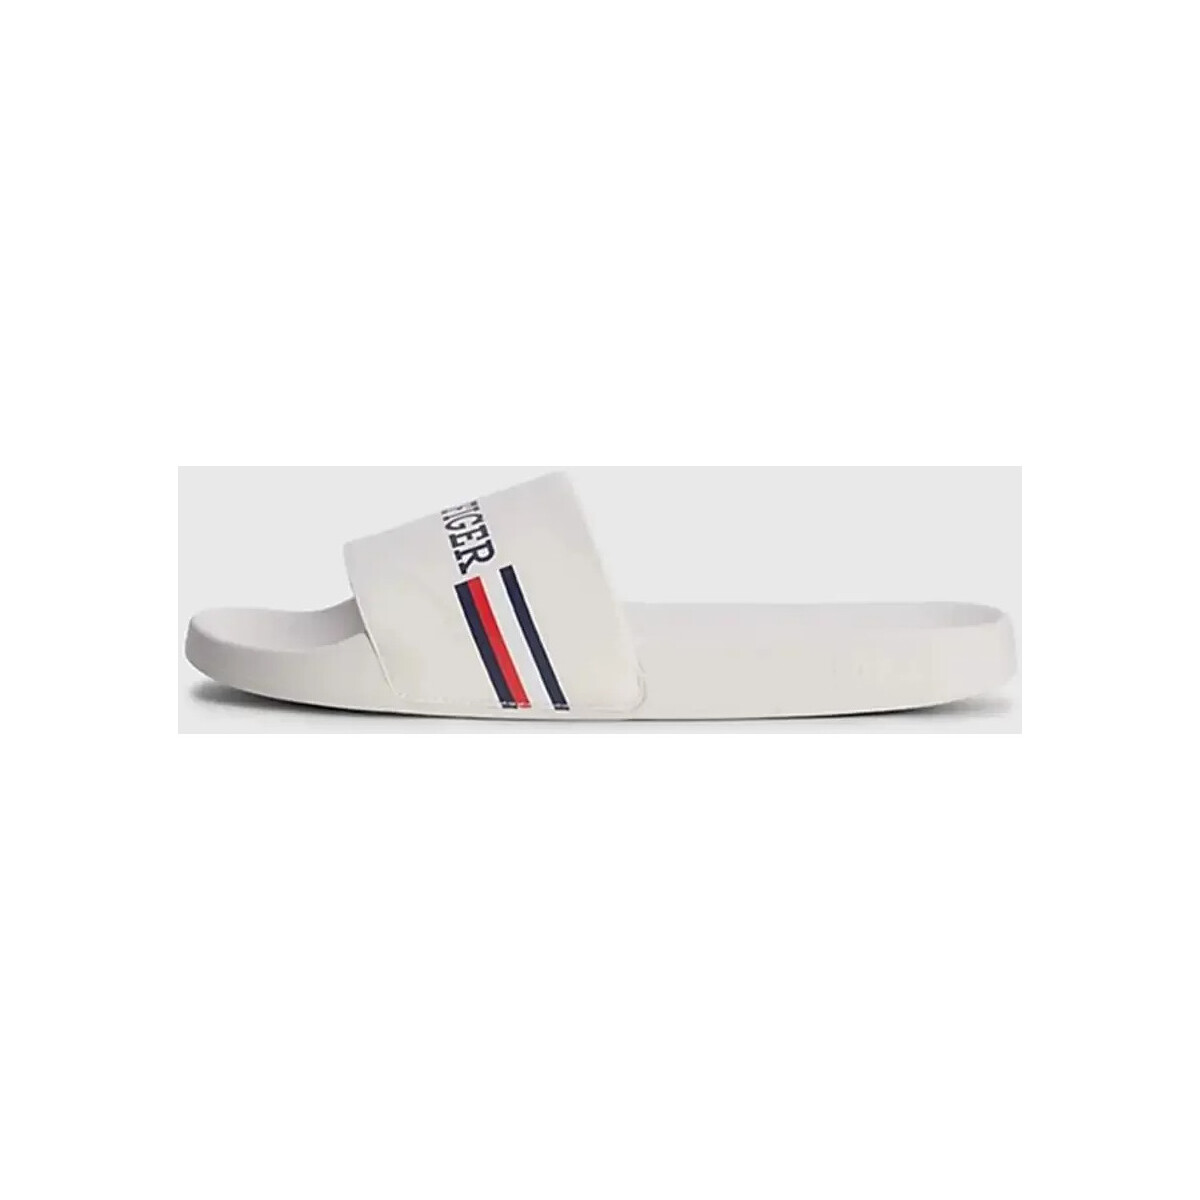 Chaussures Homme Claquettes Tommy Jeans signature pool Blanc